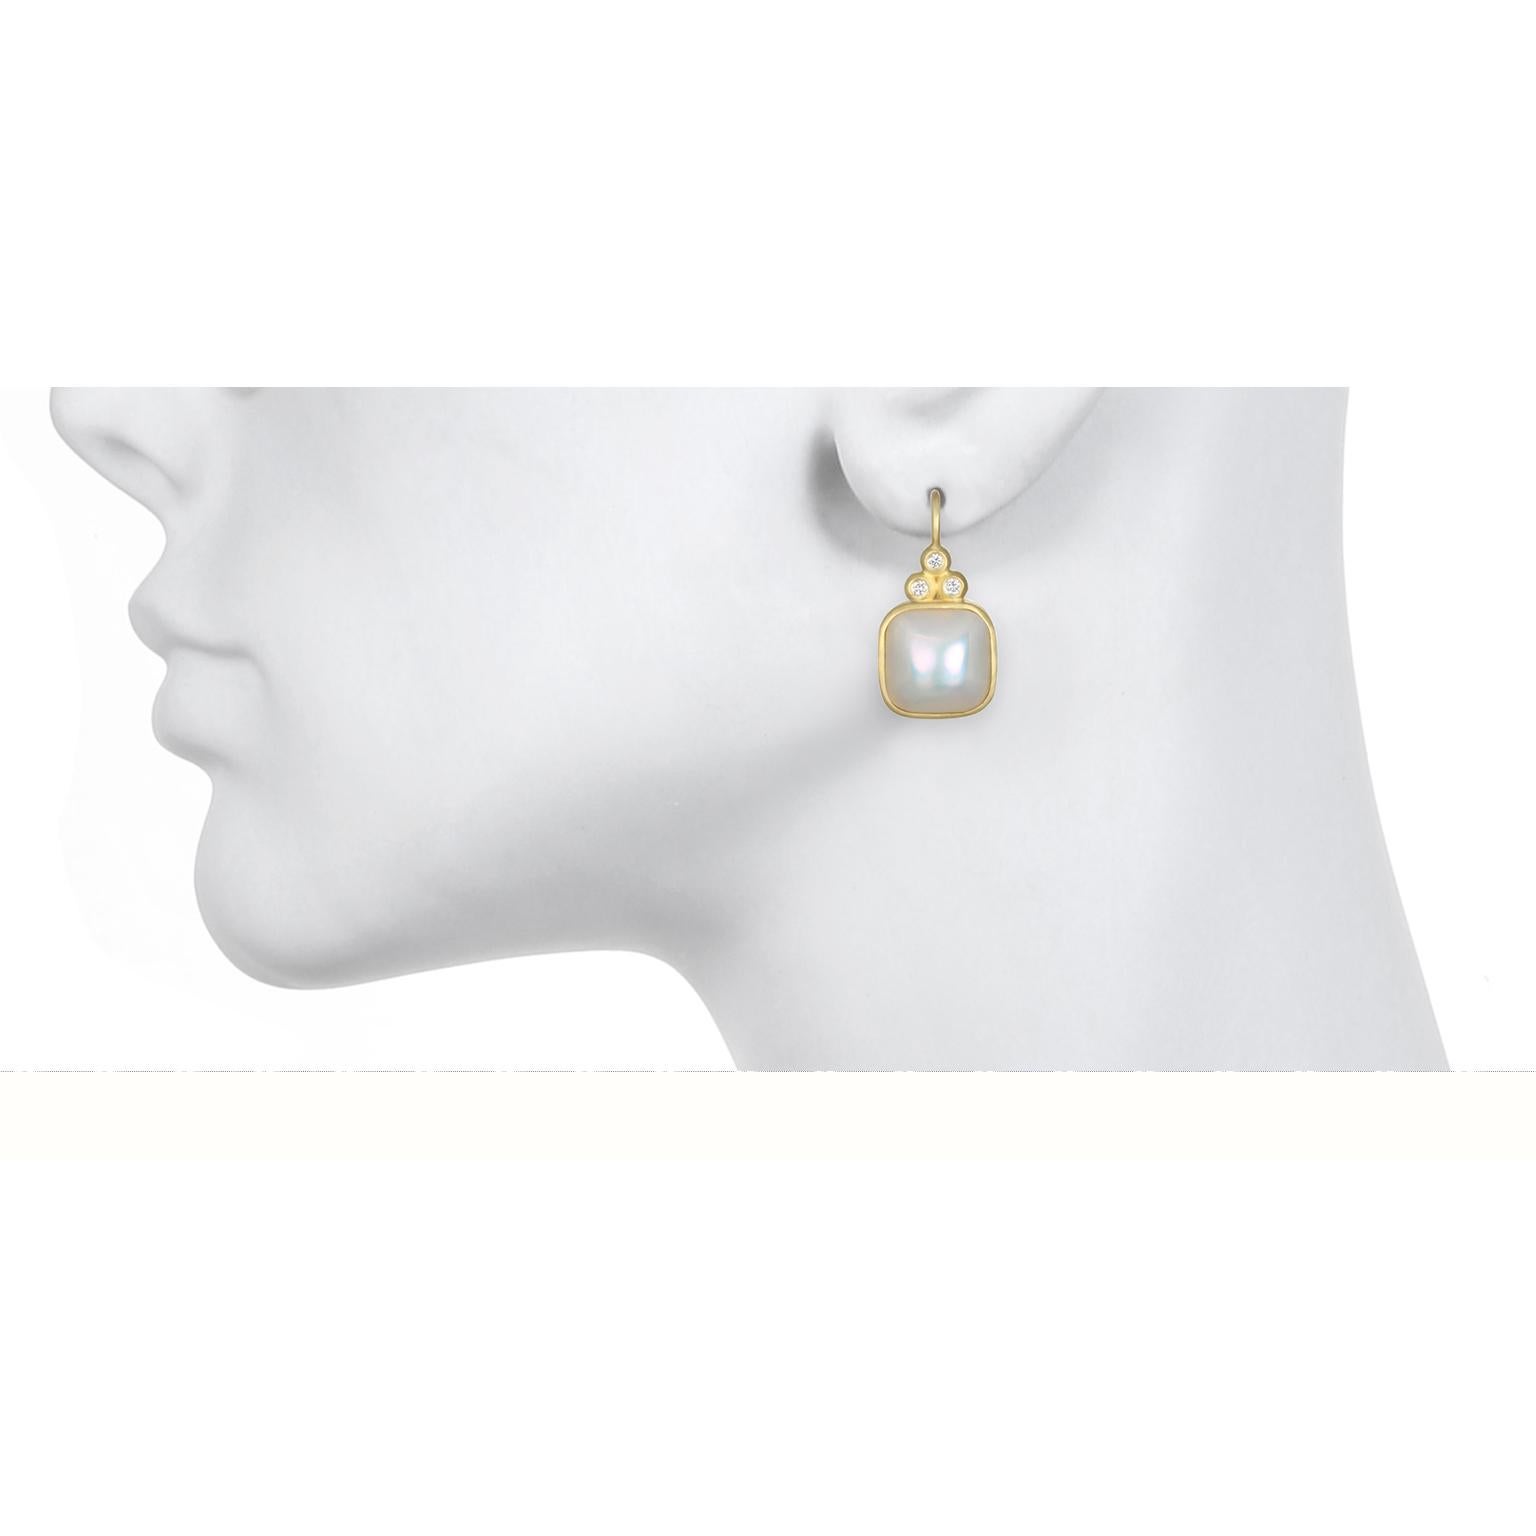 A classic combination of diamonds and pearls. Faye Kim's mabe pearl earrings with triple diamonds are bezel set in 18k gold with lever backs. AAA Gem quality mabe pearls have a beautiful luster and the very desirable rose overtones. 
Length x Width: